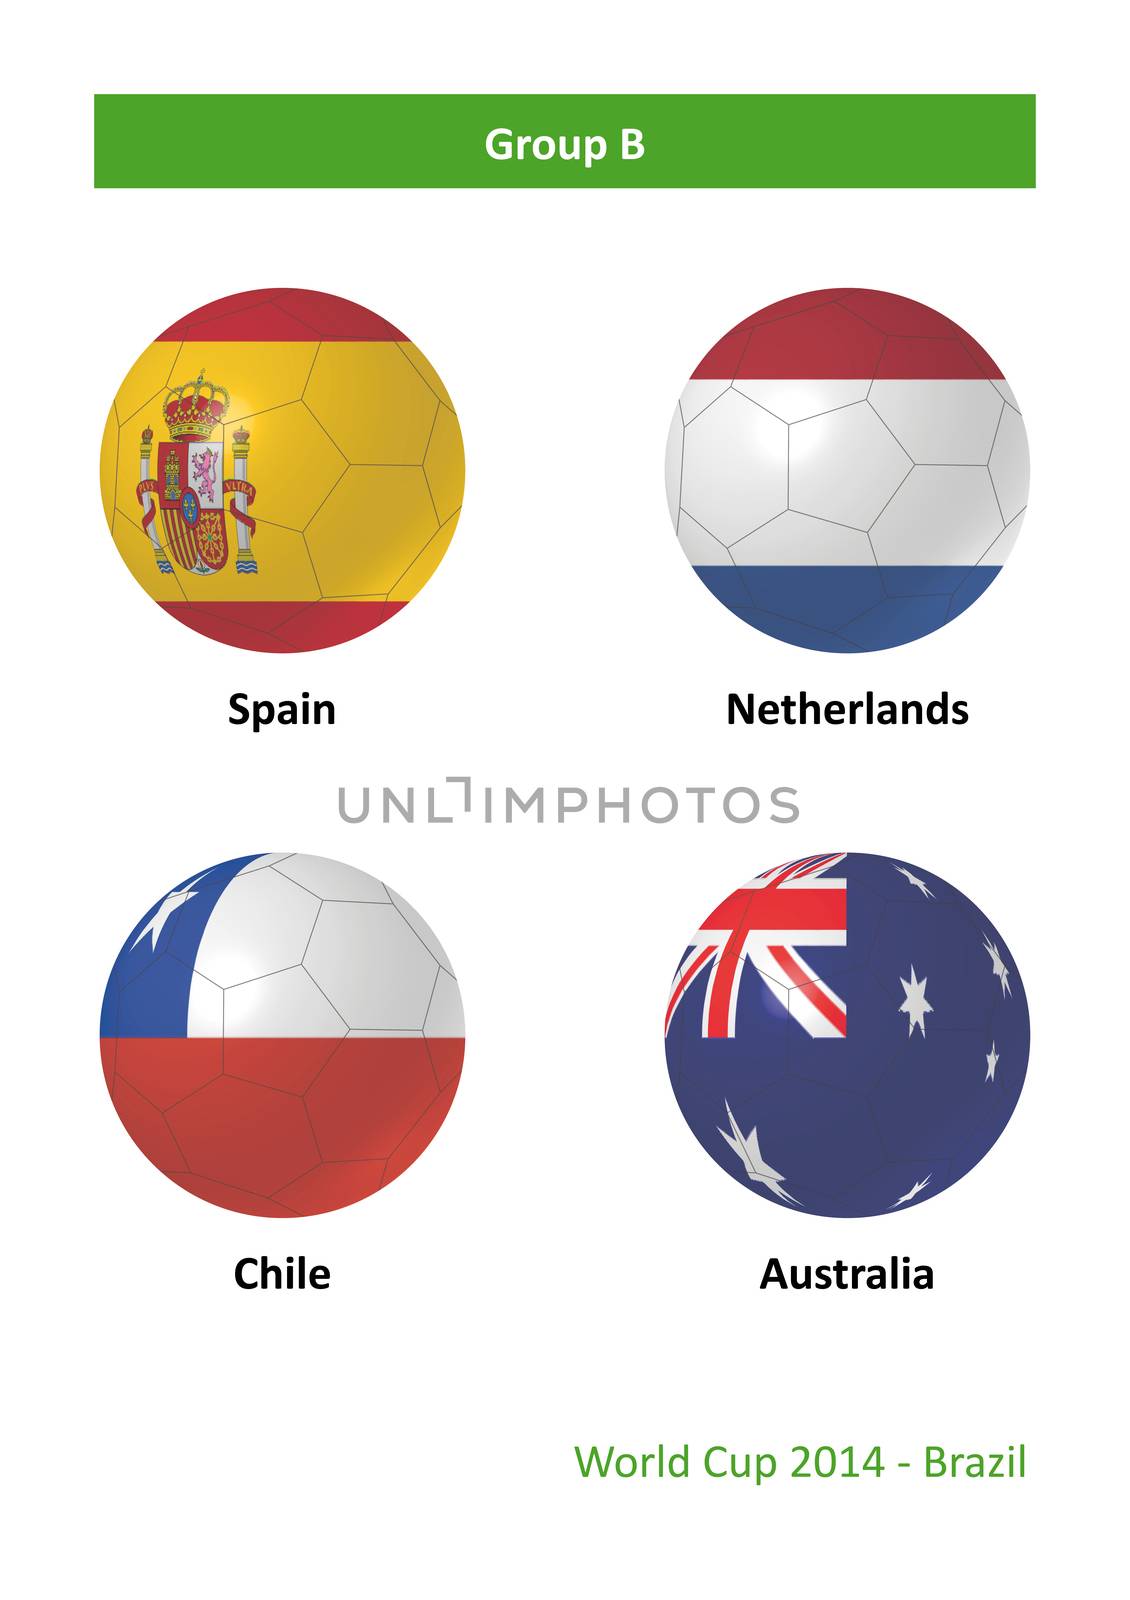 3D soccer balls with group B country flags World Cup Football Brazil 2014